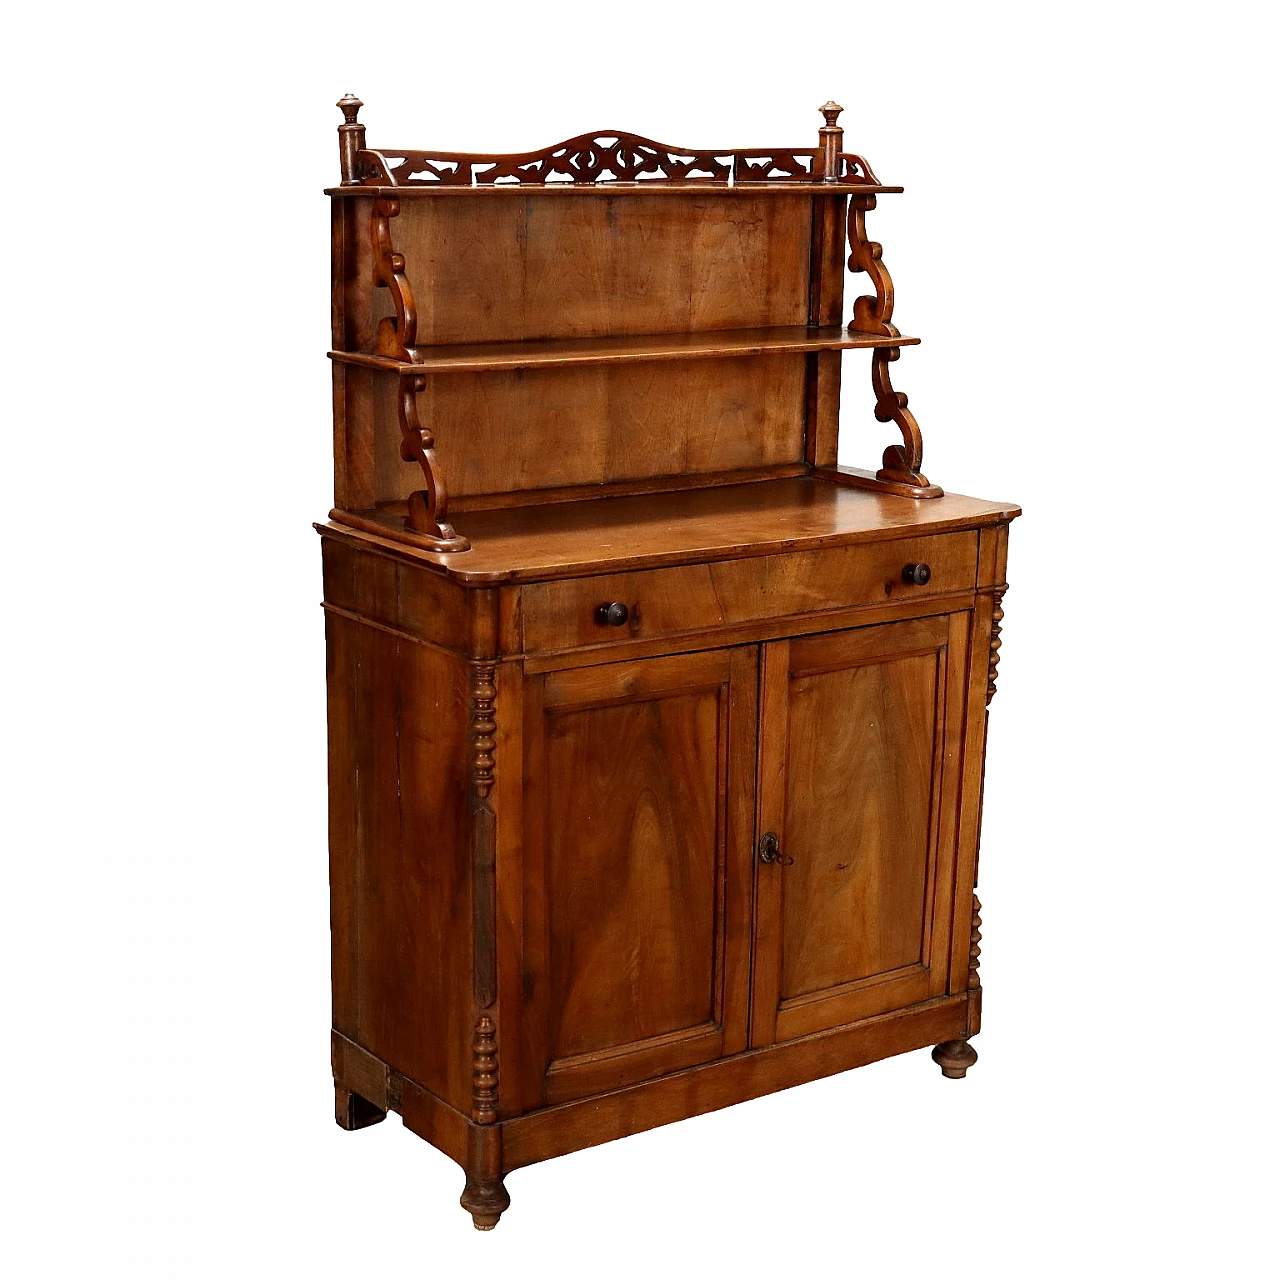 Walnut sideboard with riser and curved uprights, 19th century 1